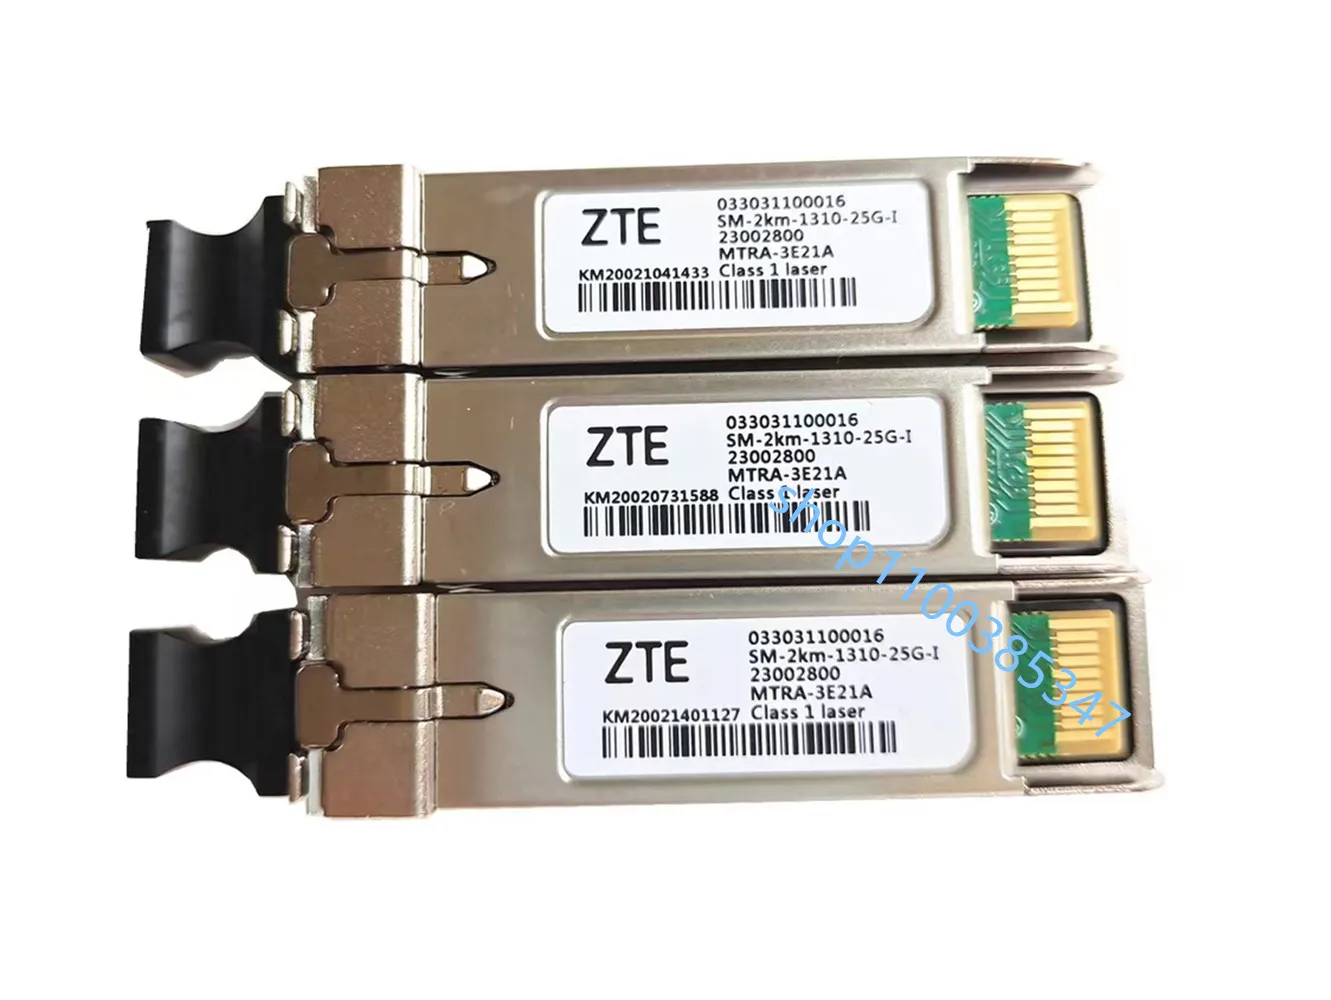 ZTE SM-2km-1310-25G-I MTRA-3E21A QSFP28 033031100016 1310nm Single-Mode LC QSFP Fiber Optical Module Transceiver Original for vw id3 id4 id6 seat occupying controller delay module one click switch original car mode delay mode camping mode